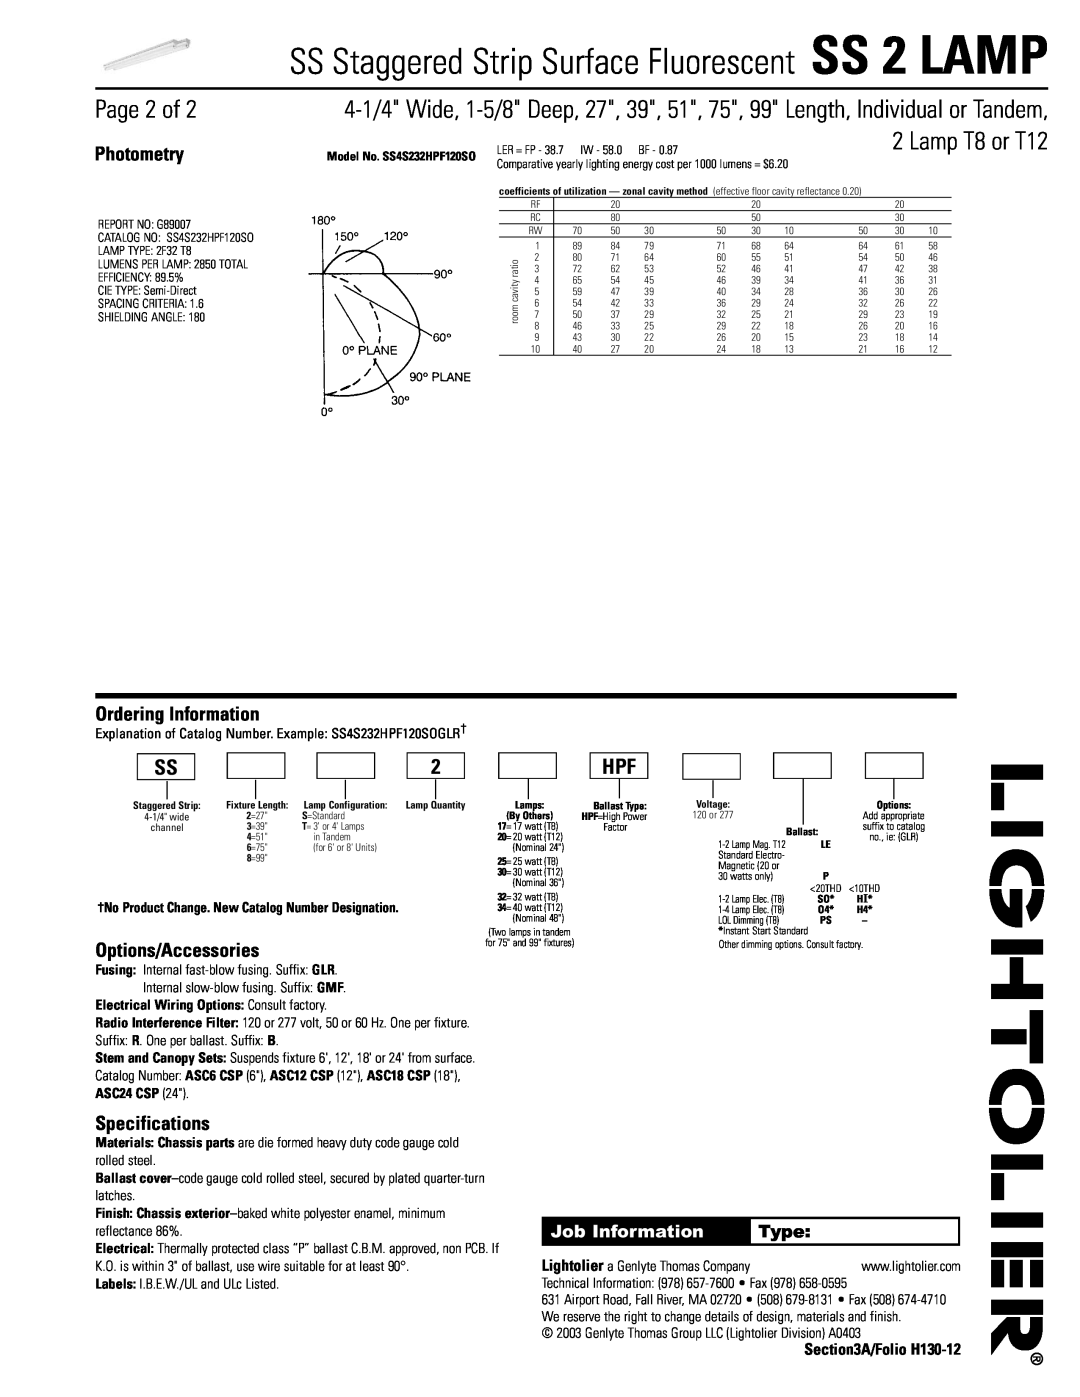 Lightolier SS 2 LAMP Photometry, Ordering Information, Options/Accessories, Specifications, Job Information, Page 2 of 